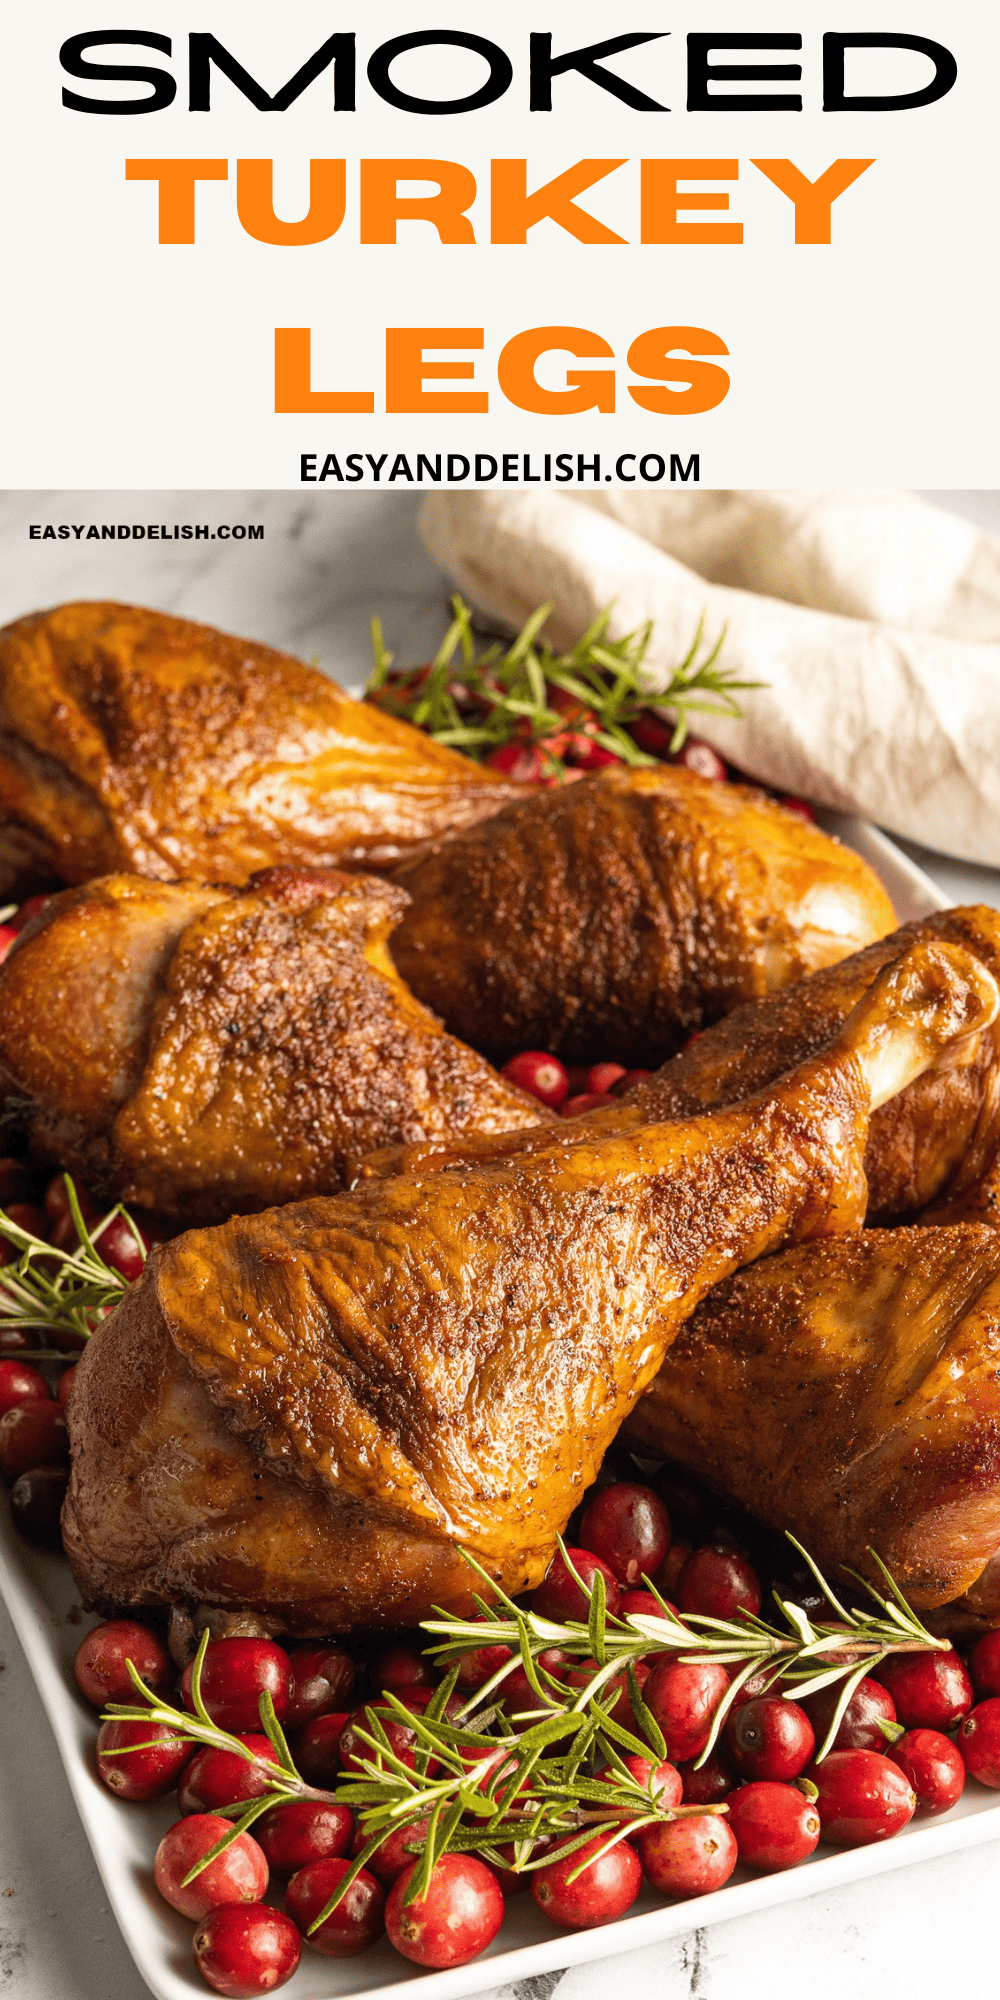 pin of close up smoked turkey legs with herb and cranberries.